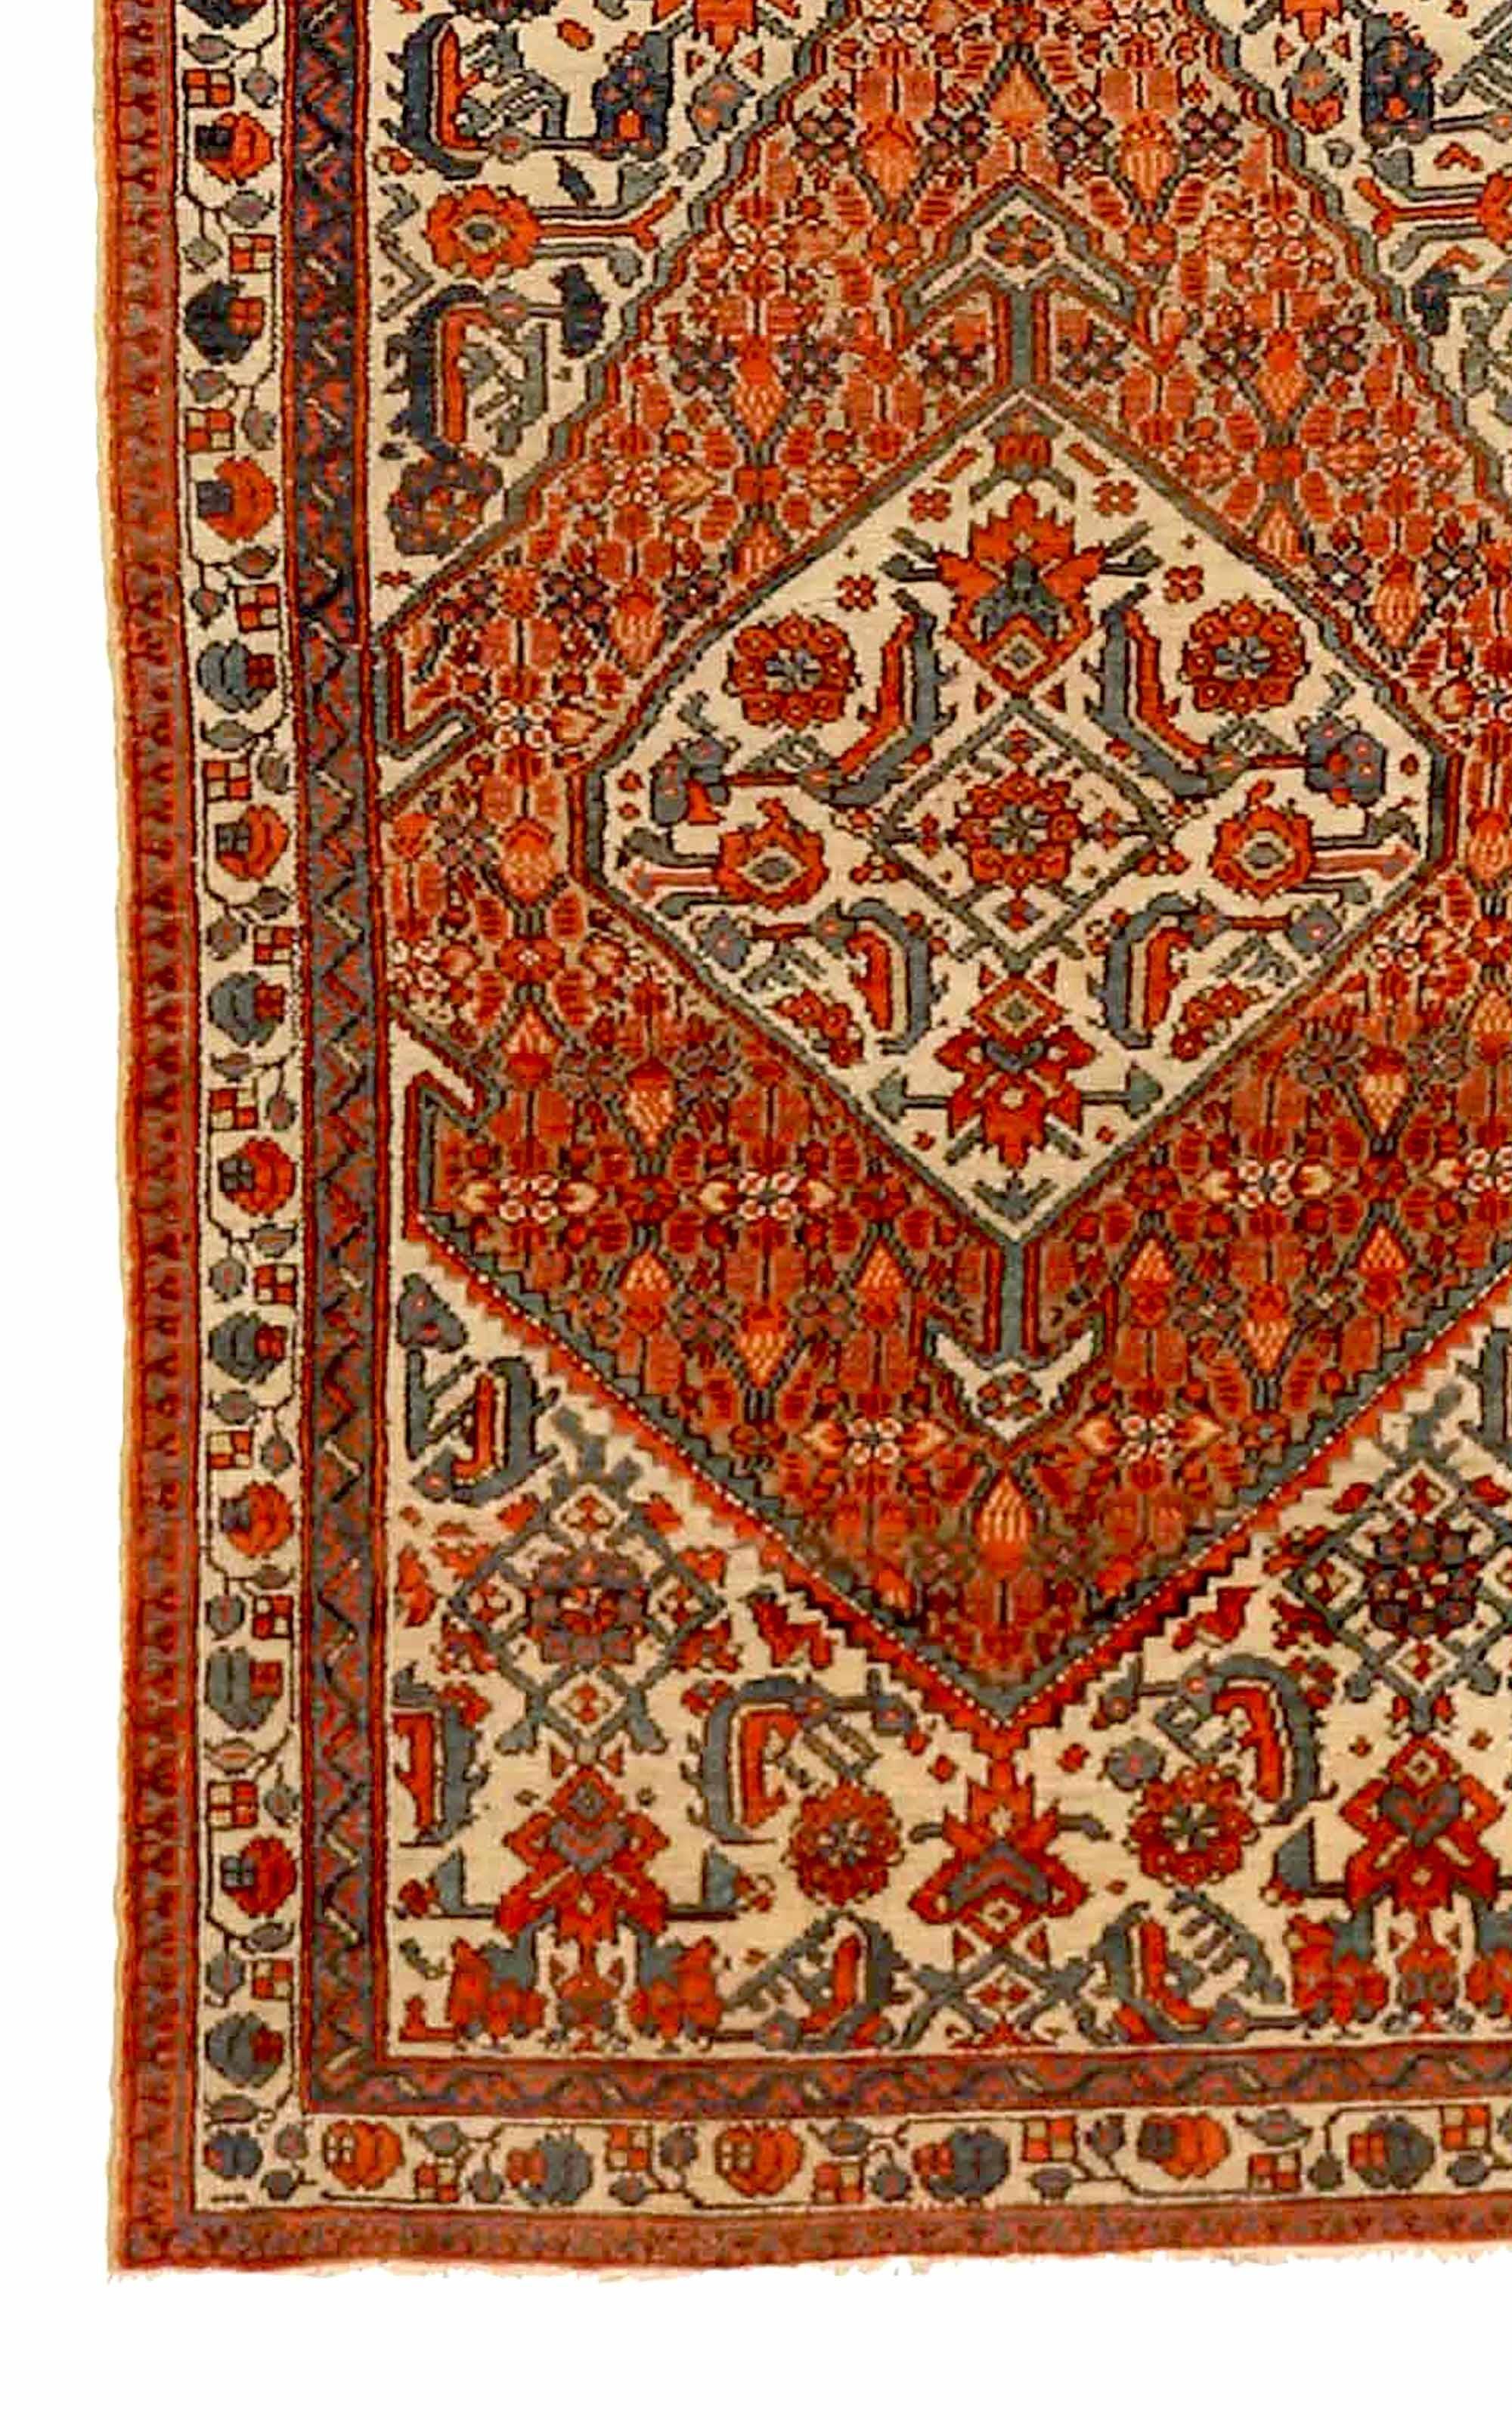 Hand-Woven Antique Persian Runner Rug Malayer Design For Sale